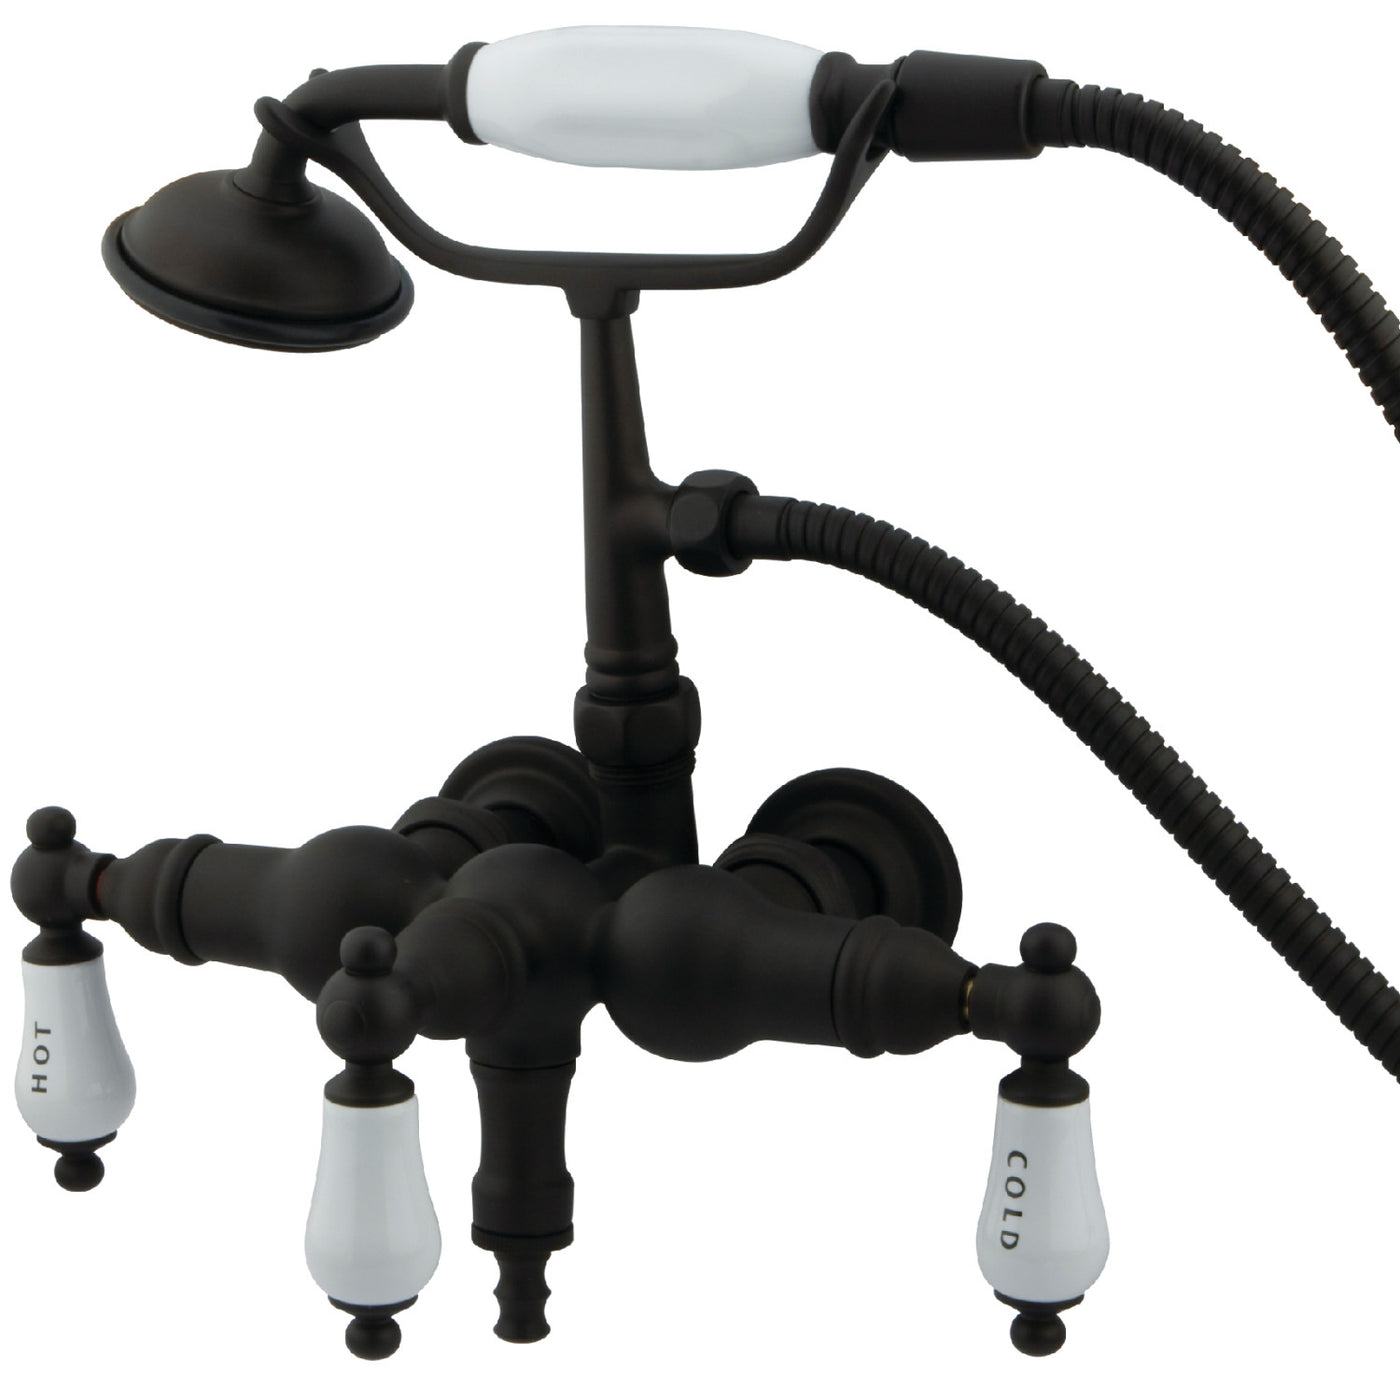 Elements of Design DT0195CL 3-3/8-Inch Wall Mount Tub Faucet with Hand Shower, Oil Rubbed Bronze